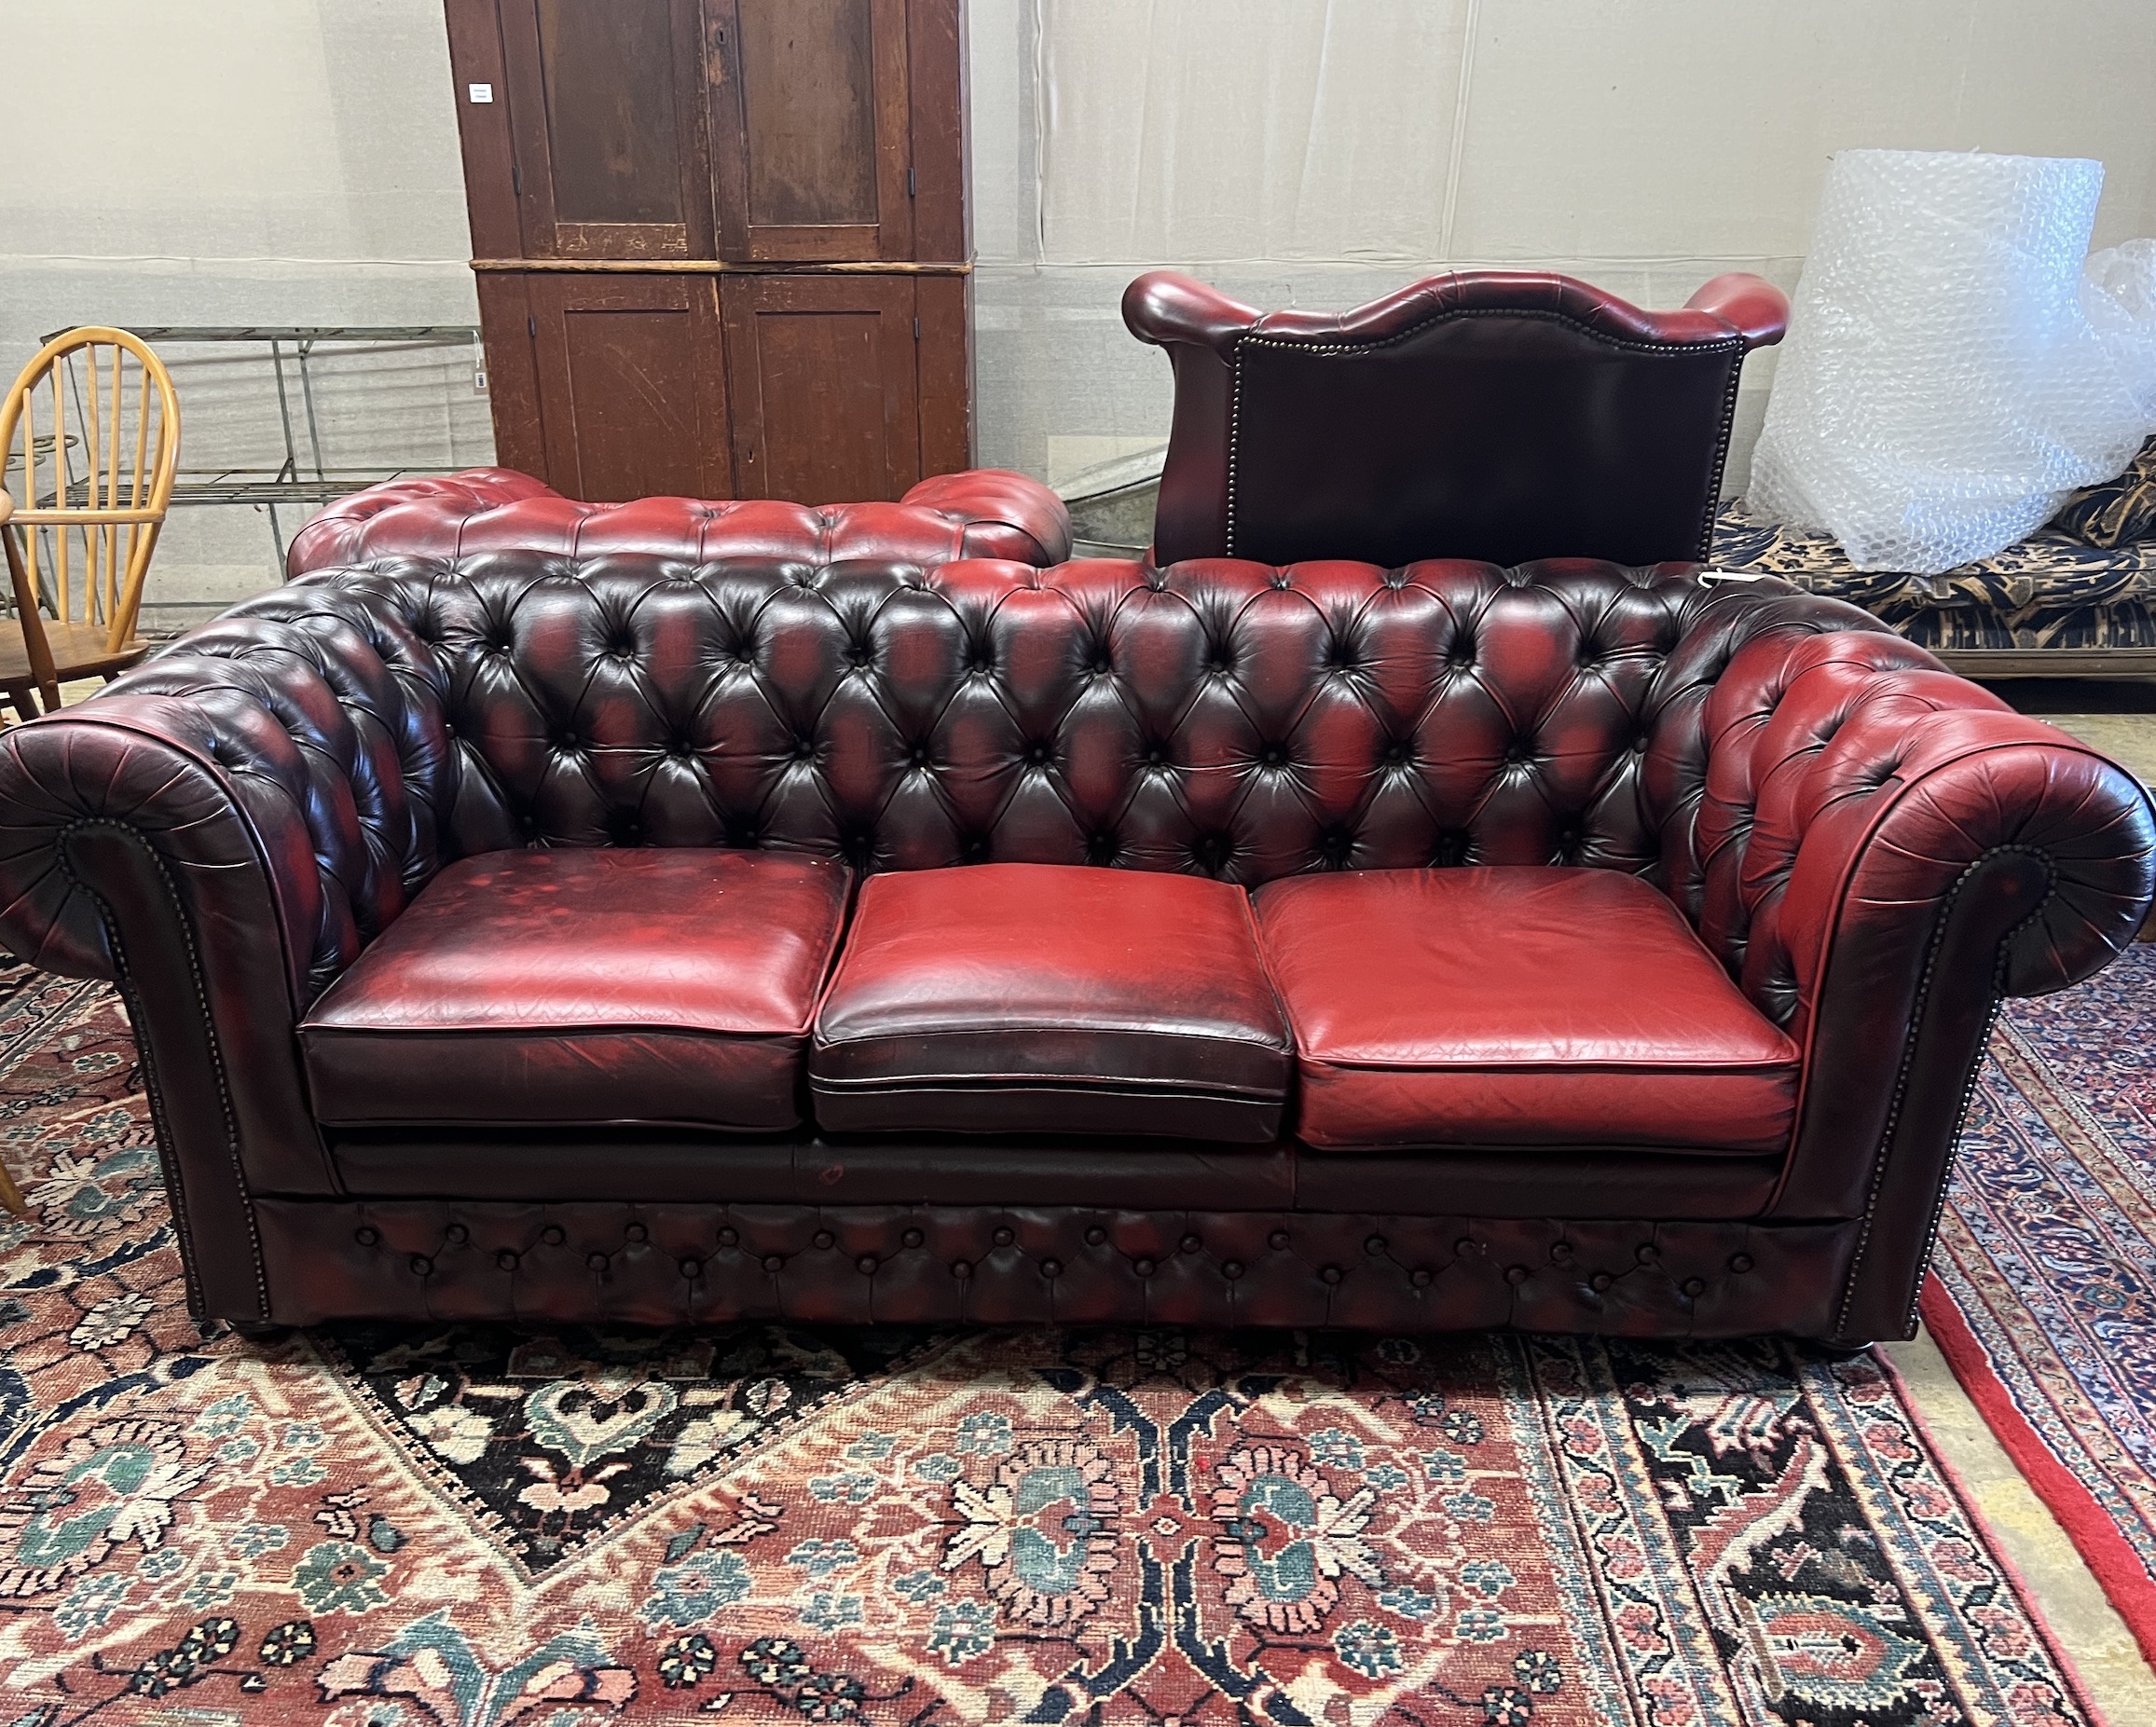 A Thomas Lloyd buttoned burgundy leather Chesterfield sofa, length 200cm, depth 85cm, height 72cm, two leather armchairs and a footstool